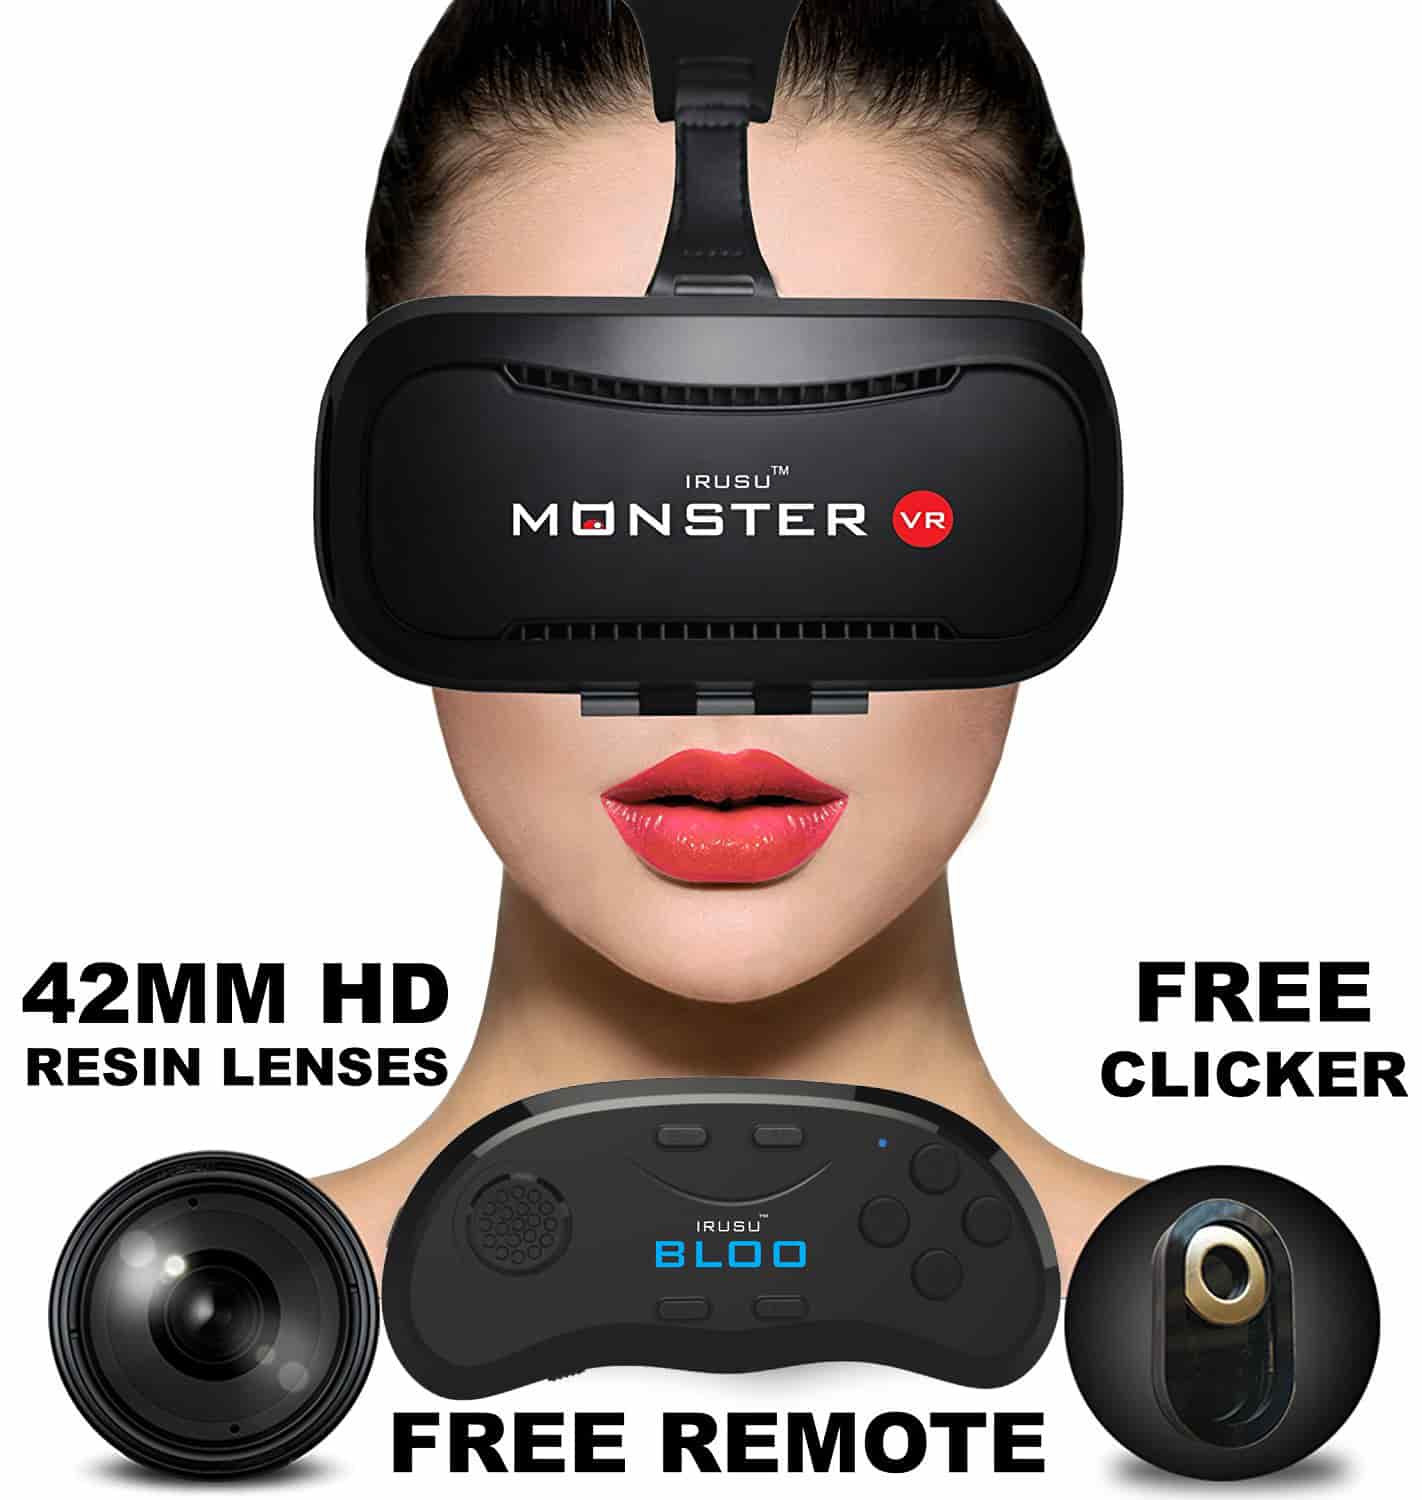 vr headsets in india for all mobiles,vr headsets online in india